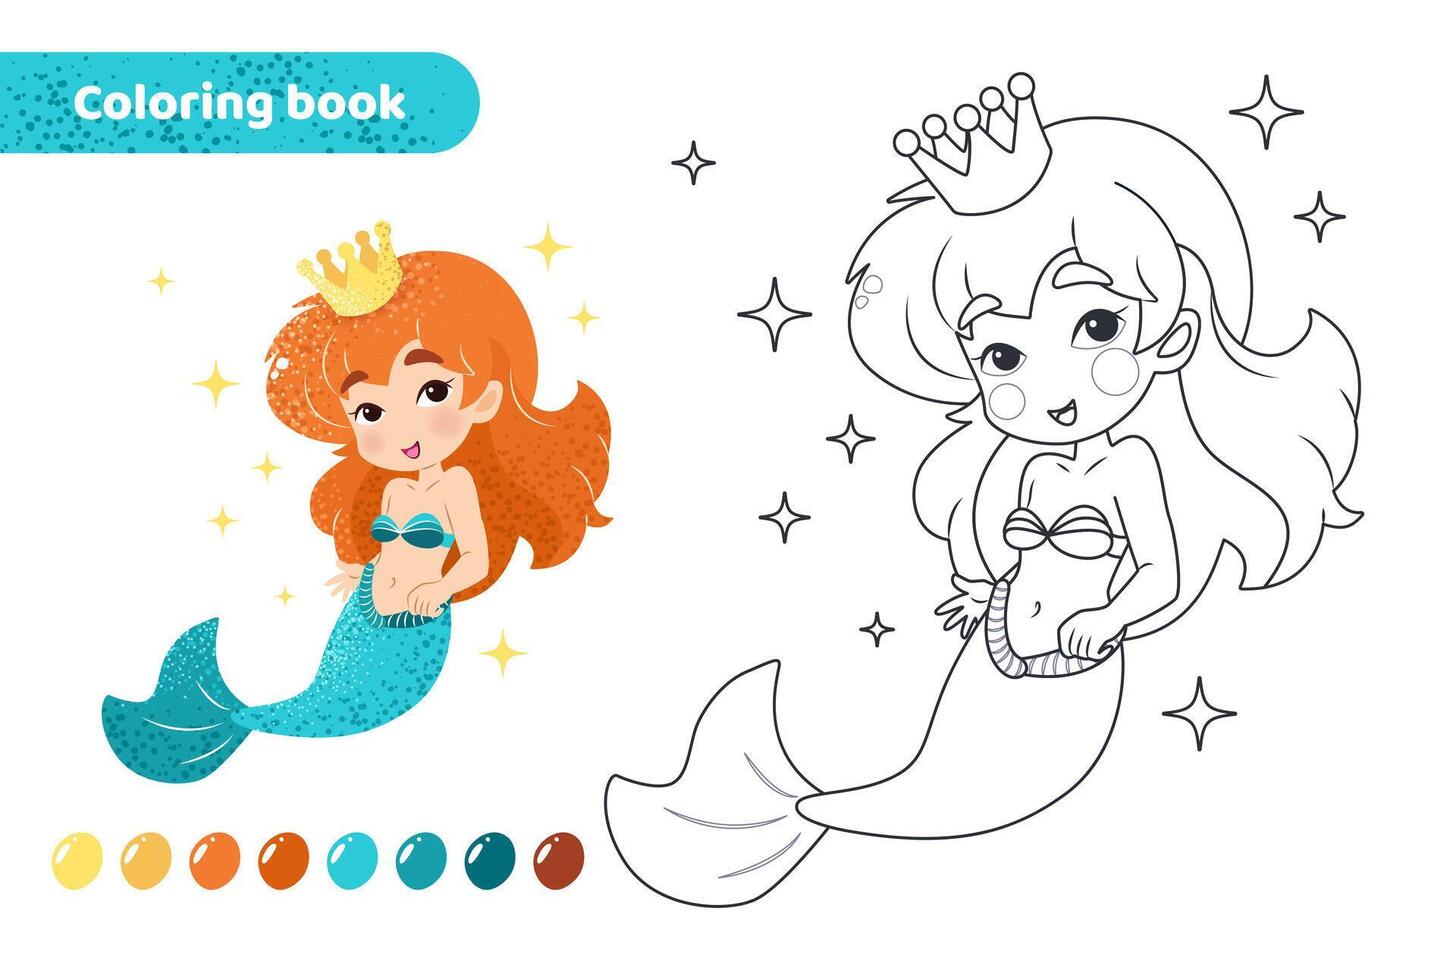 Coloring book for kids. Worksheet for drawing with cartoon mermaid. Cute magical creature with crown and stars. Coloring page with color palette for children. Vector illustration.